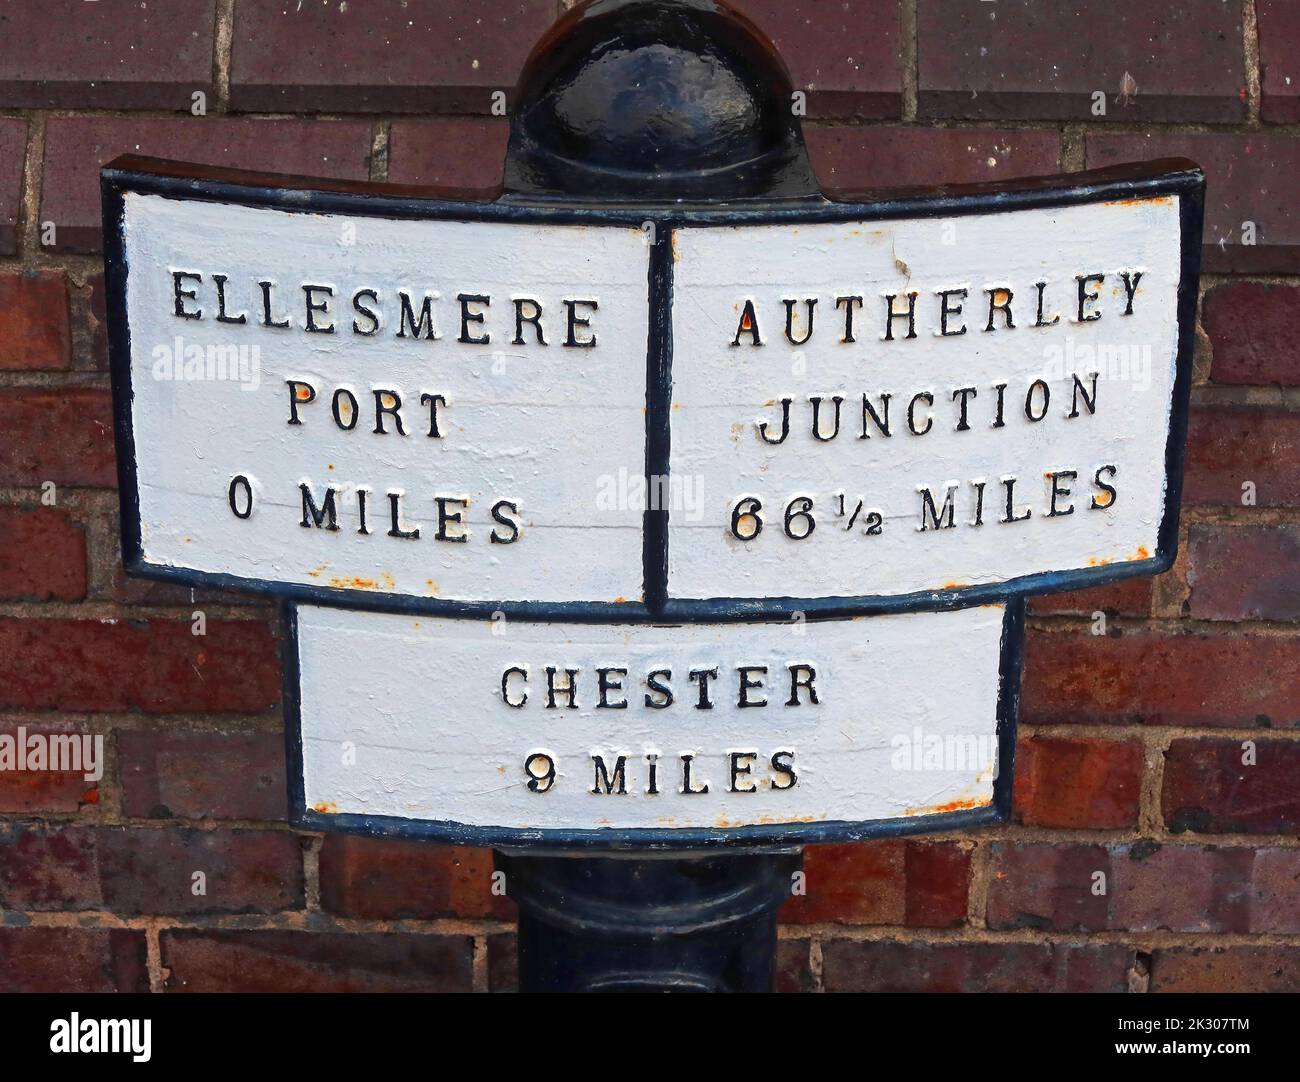 Canal distance marker, sign at Ellesmere Port, to Autherley Junction and Chester Stock Photo